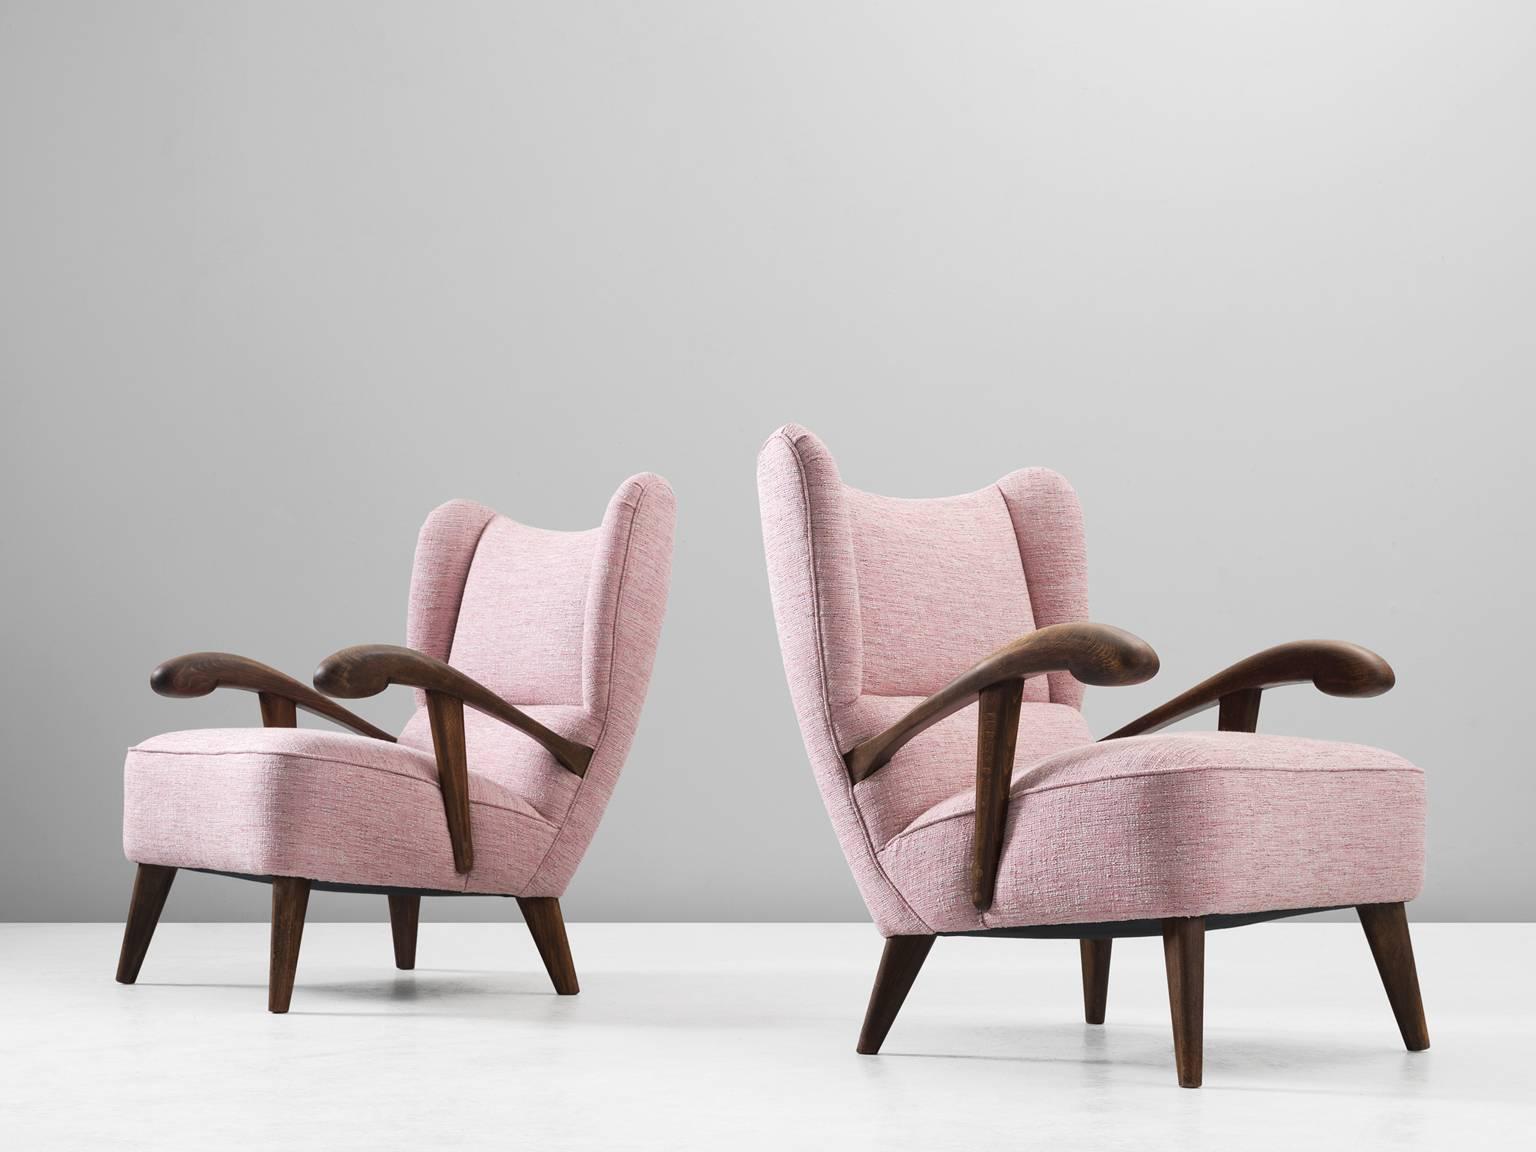 Set of two lounge chairs, in beech and fabric, Czech Republic, 1950s. 

Elegant pair of two wingback chairs with solid beech frame. These armchairs show beautiful lines and curves. The grain of the stained wood is nicely visible, especially on the